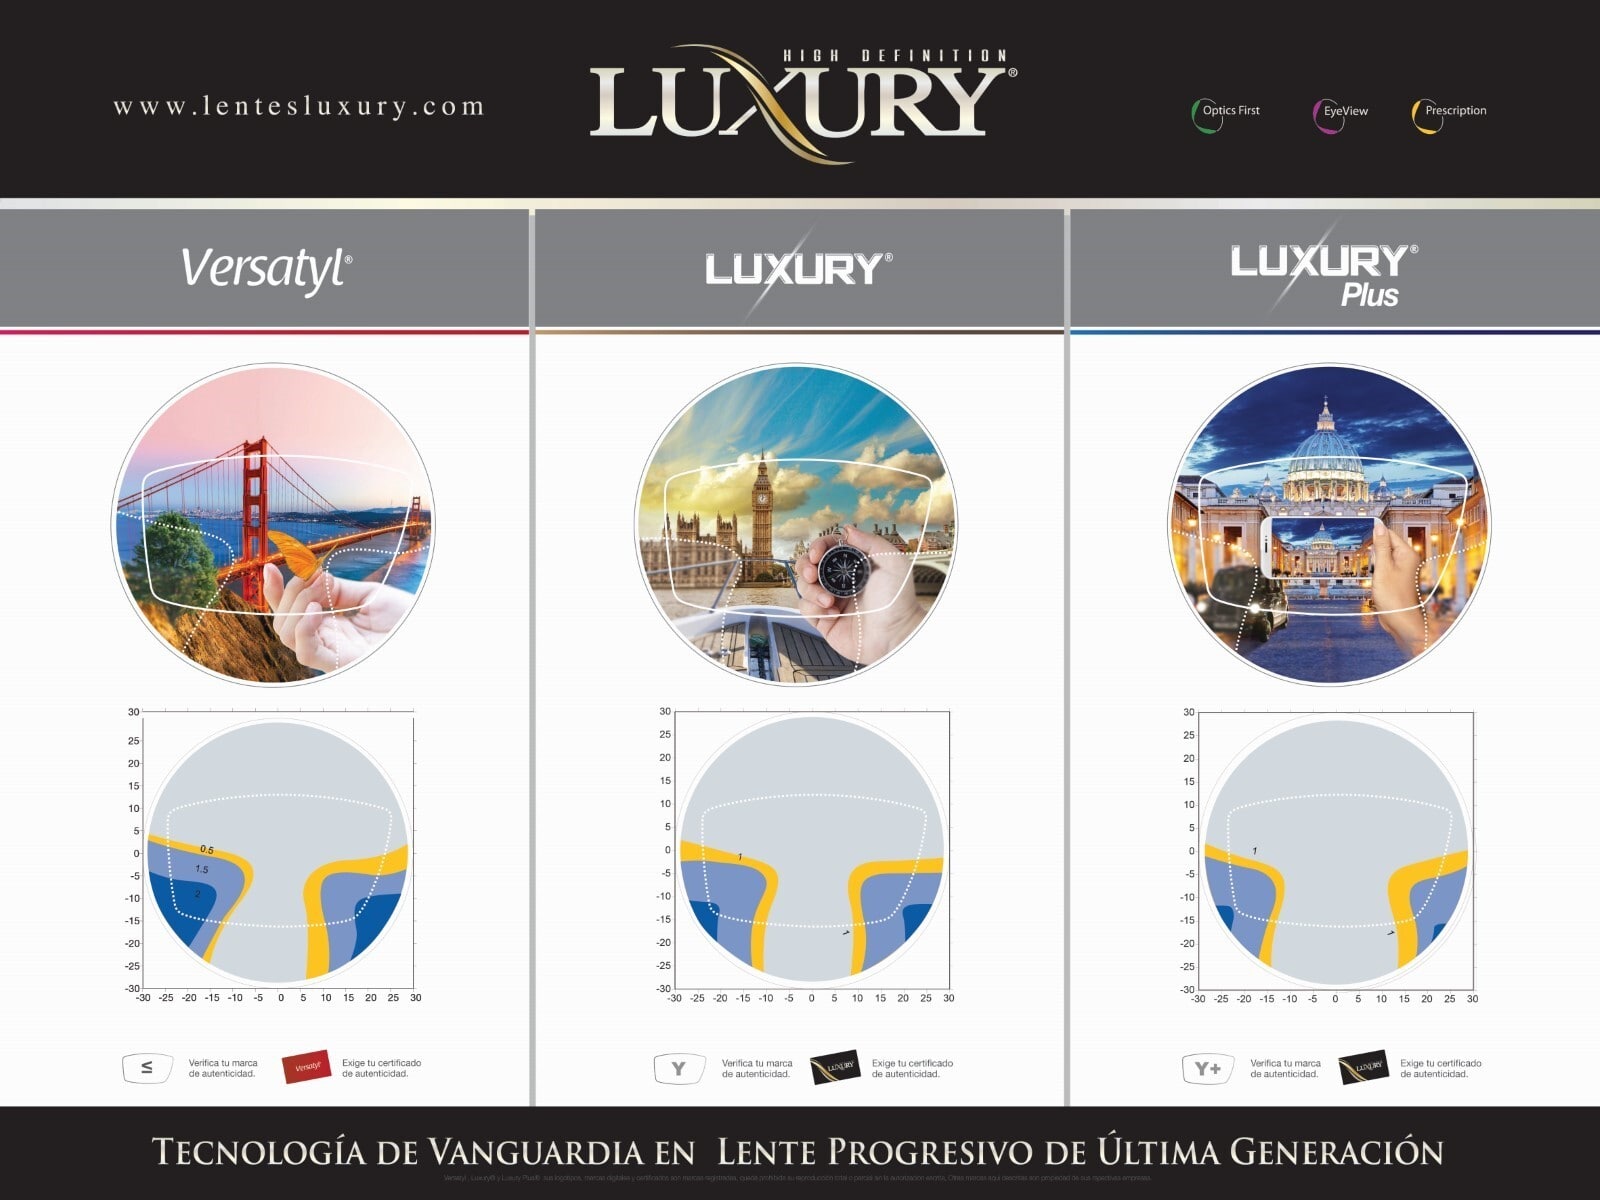 Comparision image between Versatyl, Luxury and Luxury Plus lenses, how they perform in outside conditions with some graphical data.